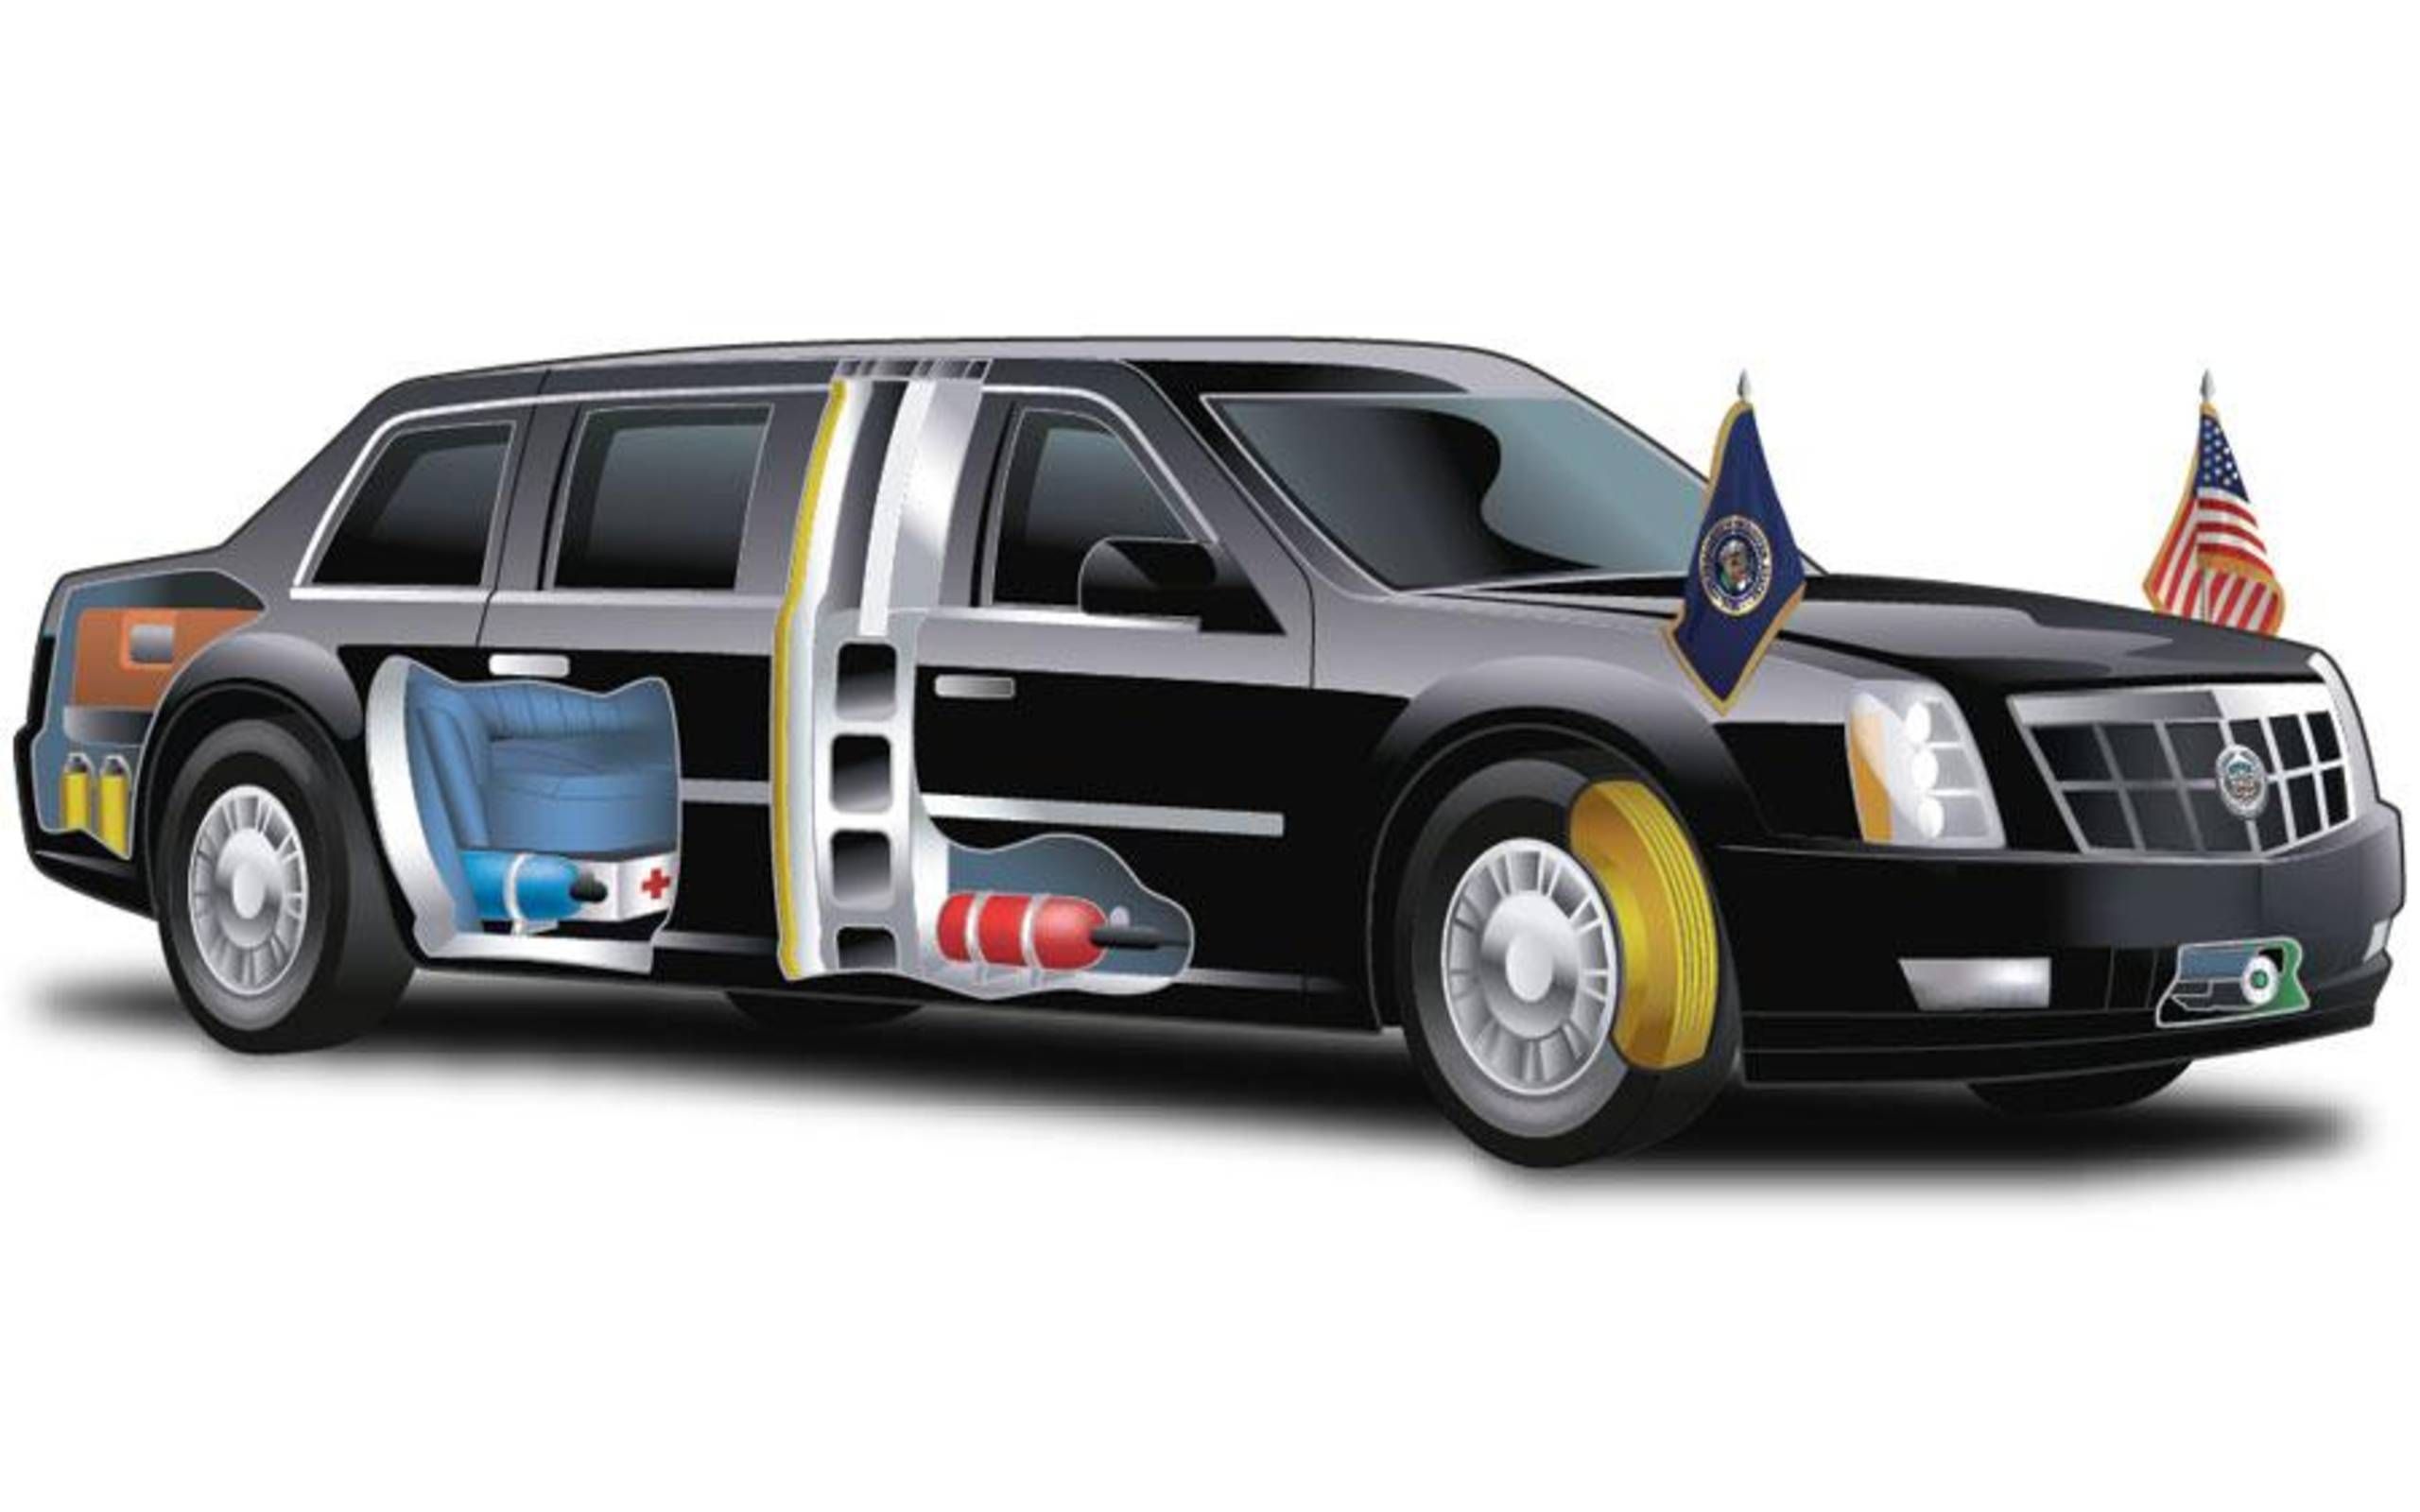 Inside the President's armored limo